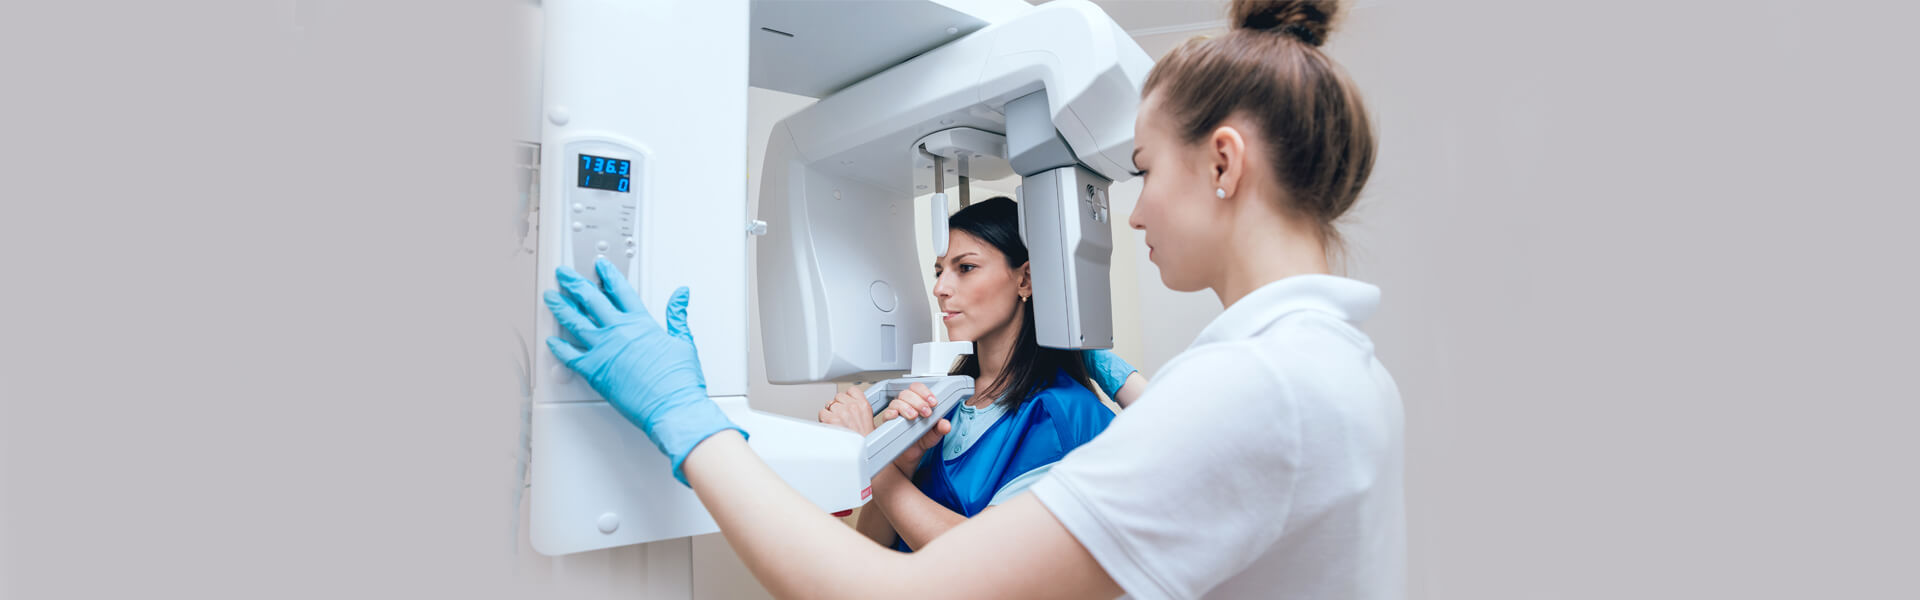 Reducing Radiation at the Dental Office